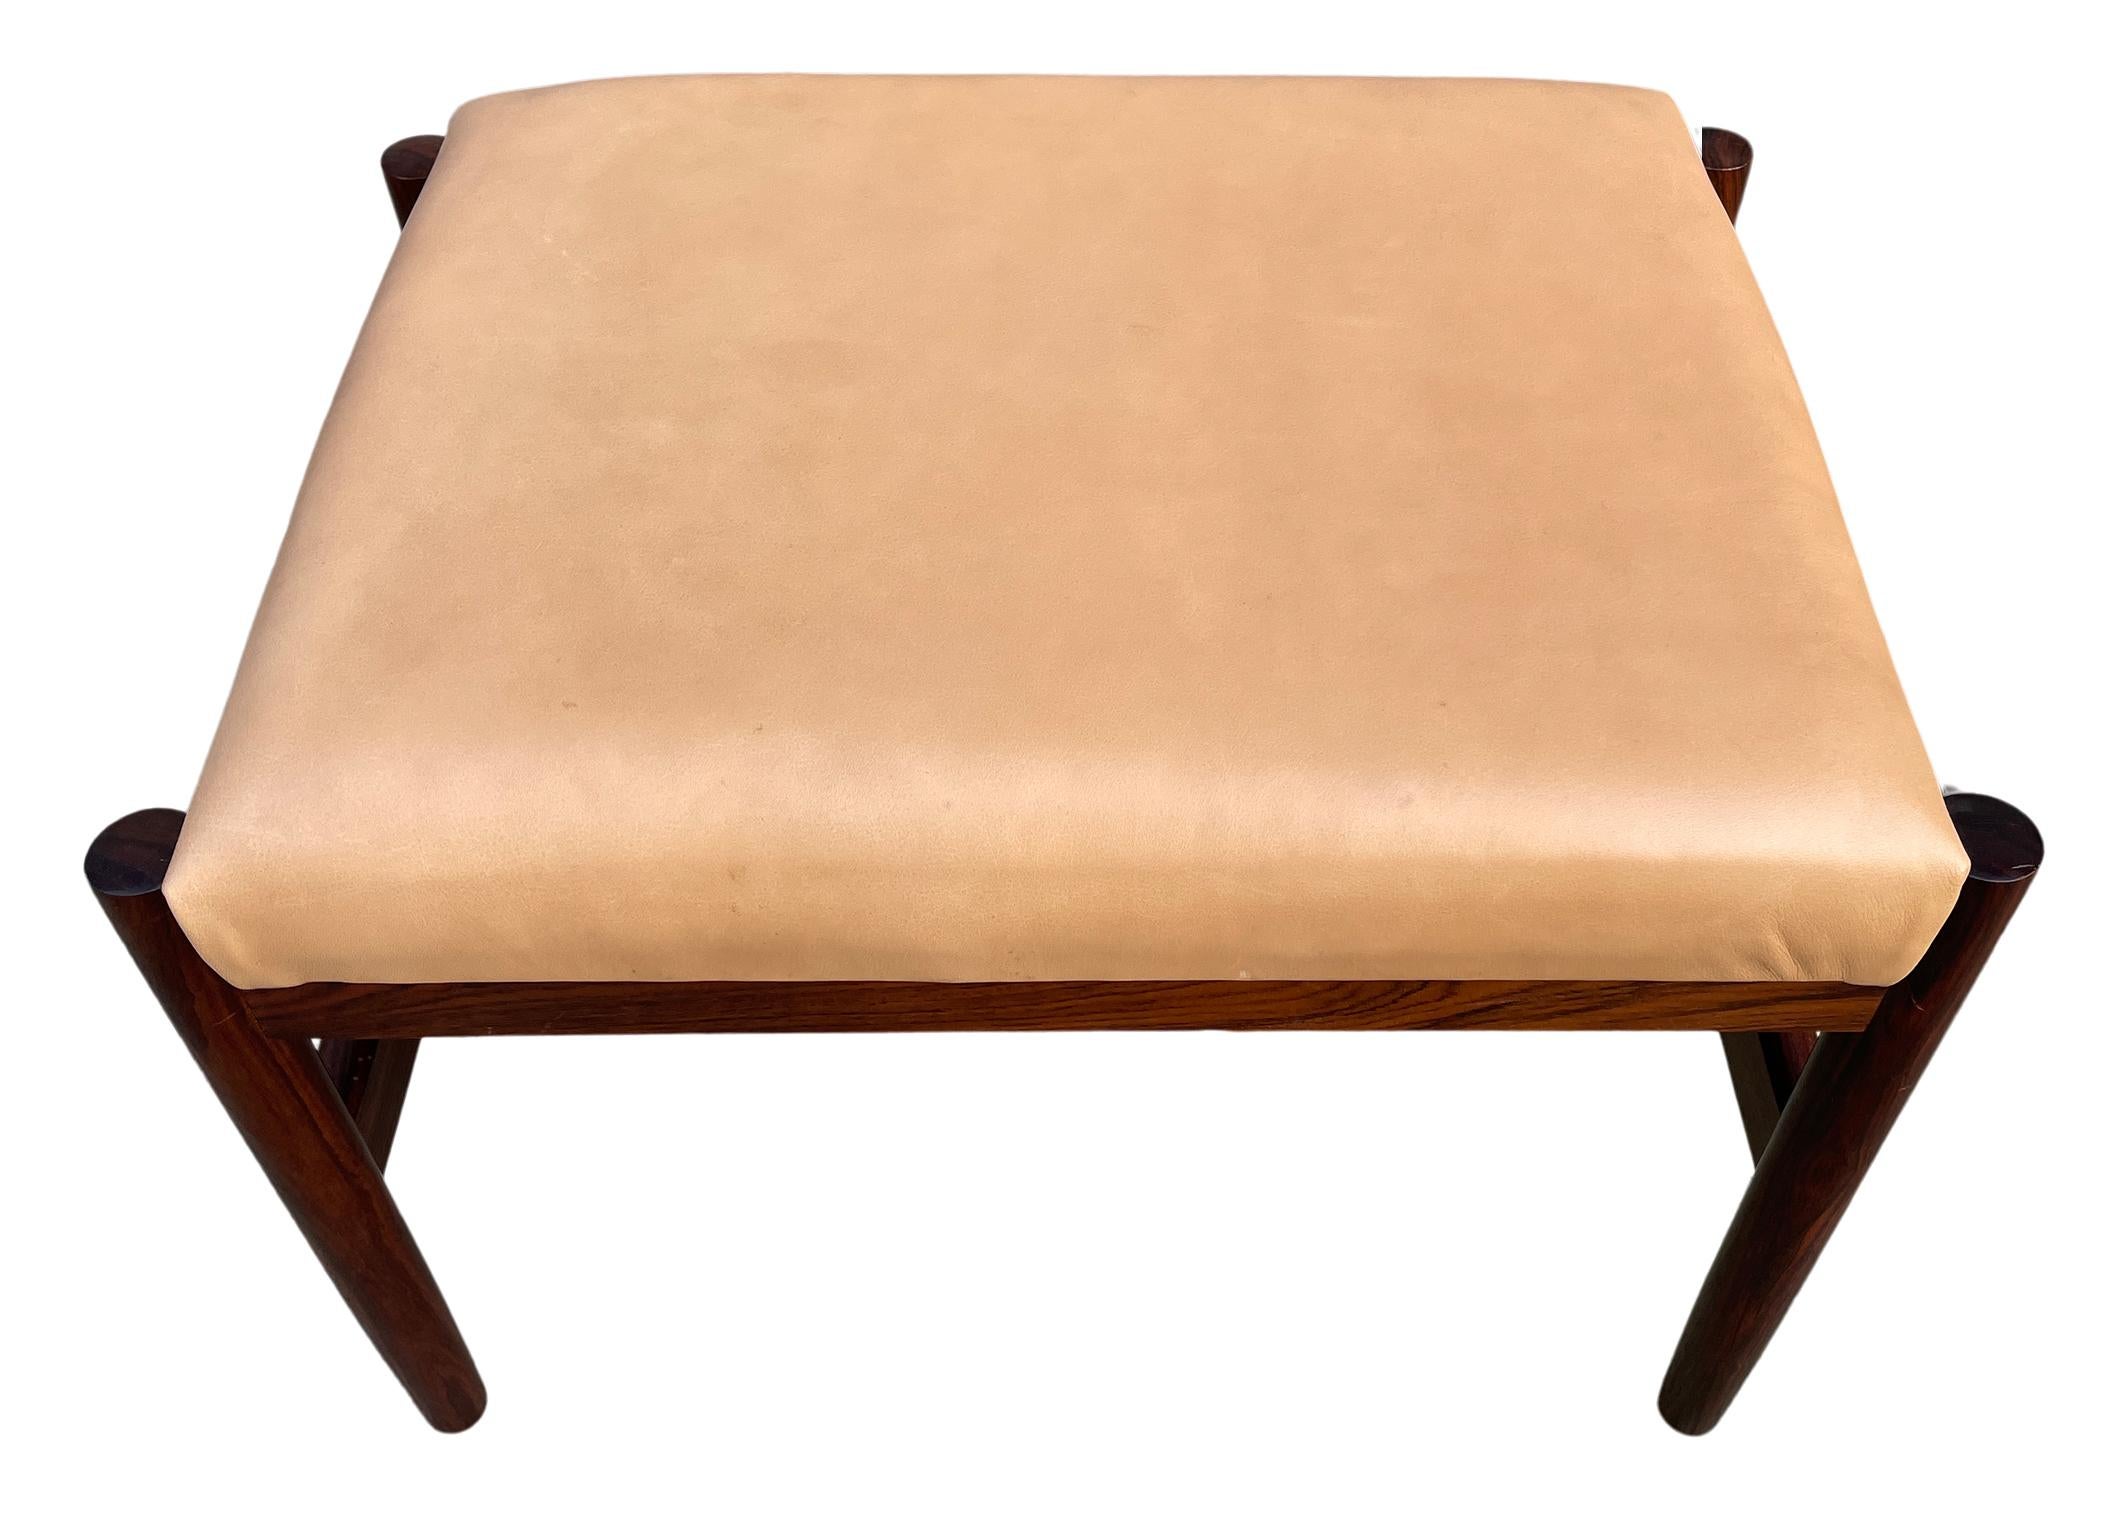 Mid Century Danish Modern spottrup mobler rosewood and leather small stool bench or ottoman. Solid rosewood - Tan leather seat cushion. Great vintage condition.